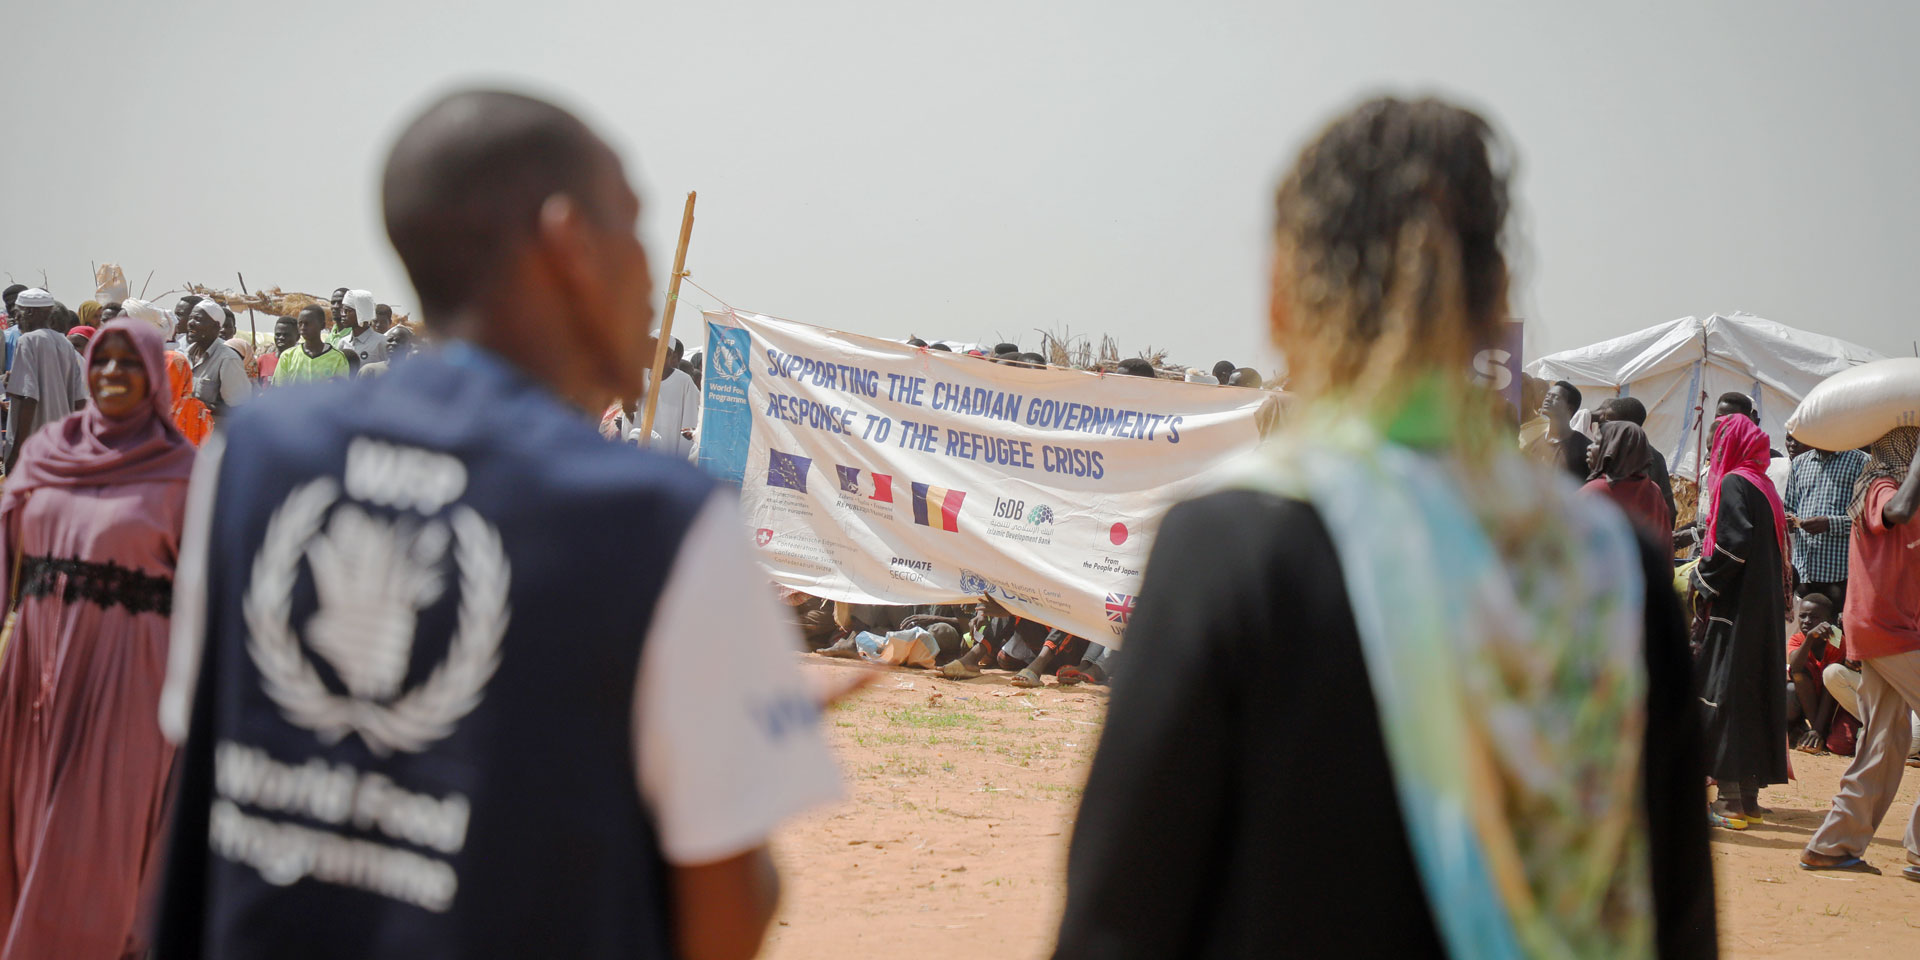 Patricia Danzi and a WFP representative standing outside the Adré refugee camp in Chad, on the border with Sudan.